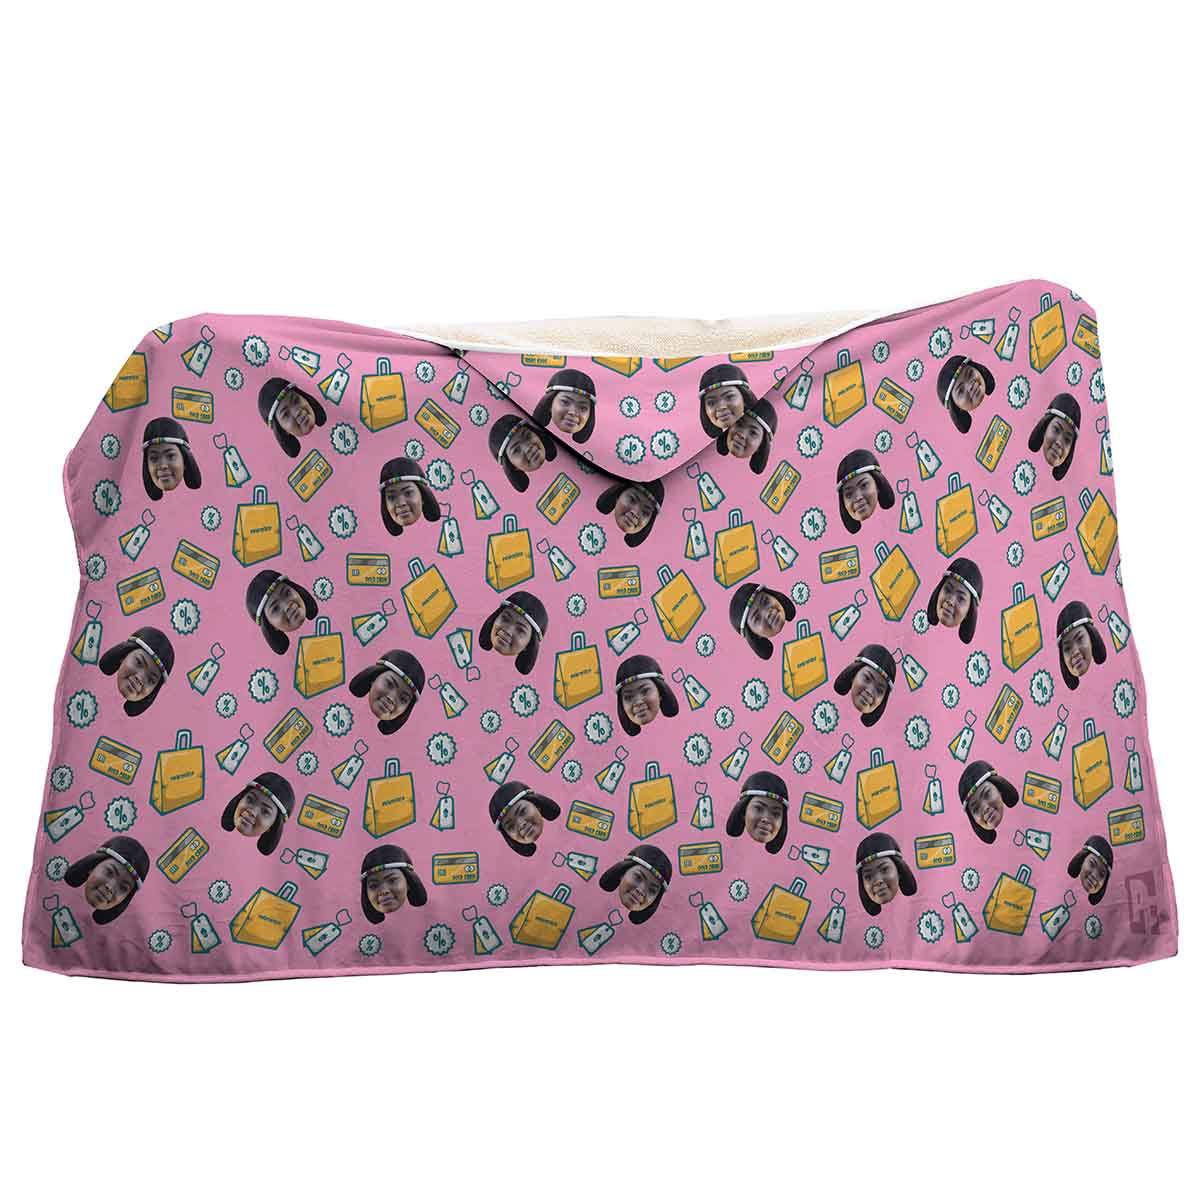 pink Shopping hooded blanket personalized with photo of face printed on it